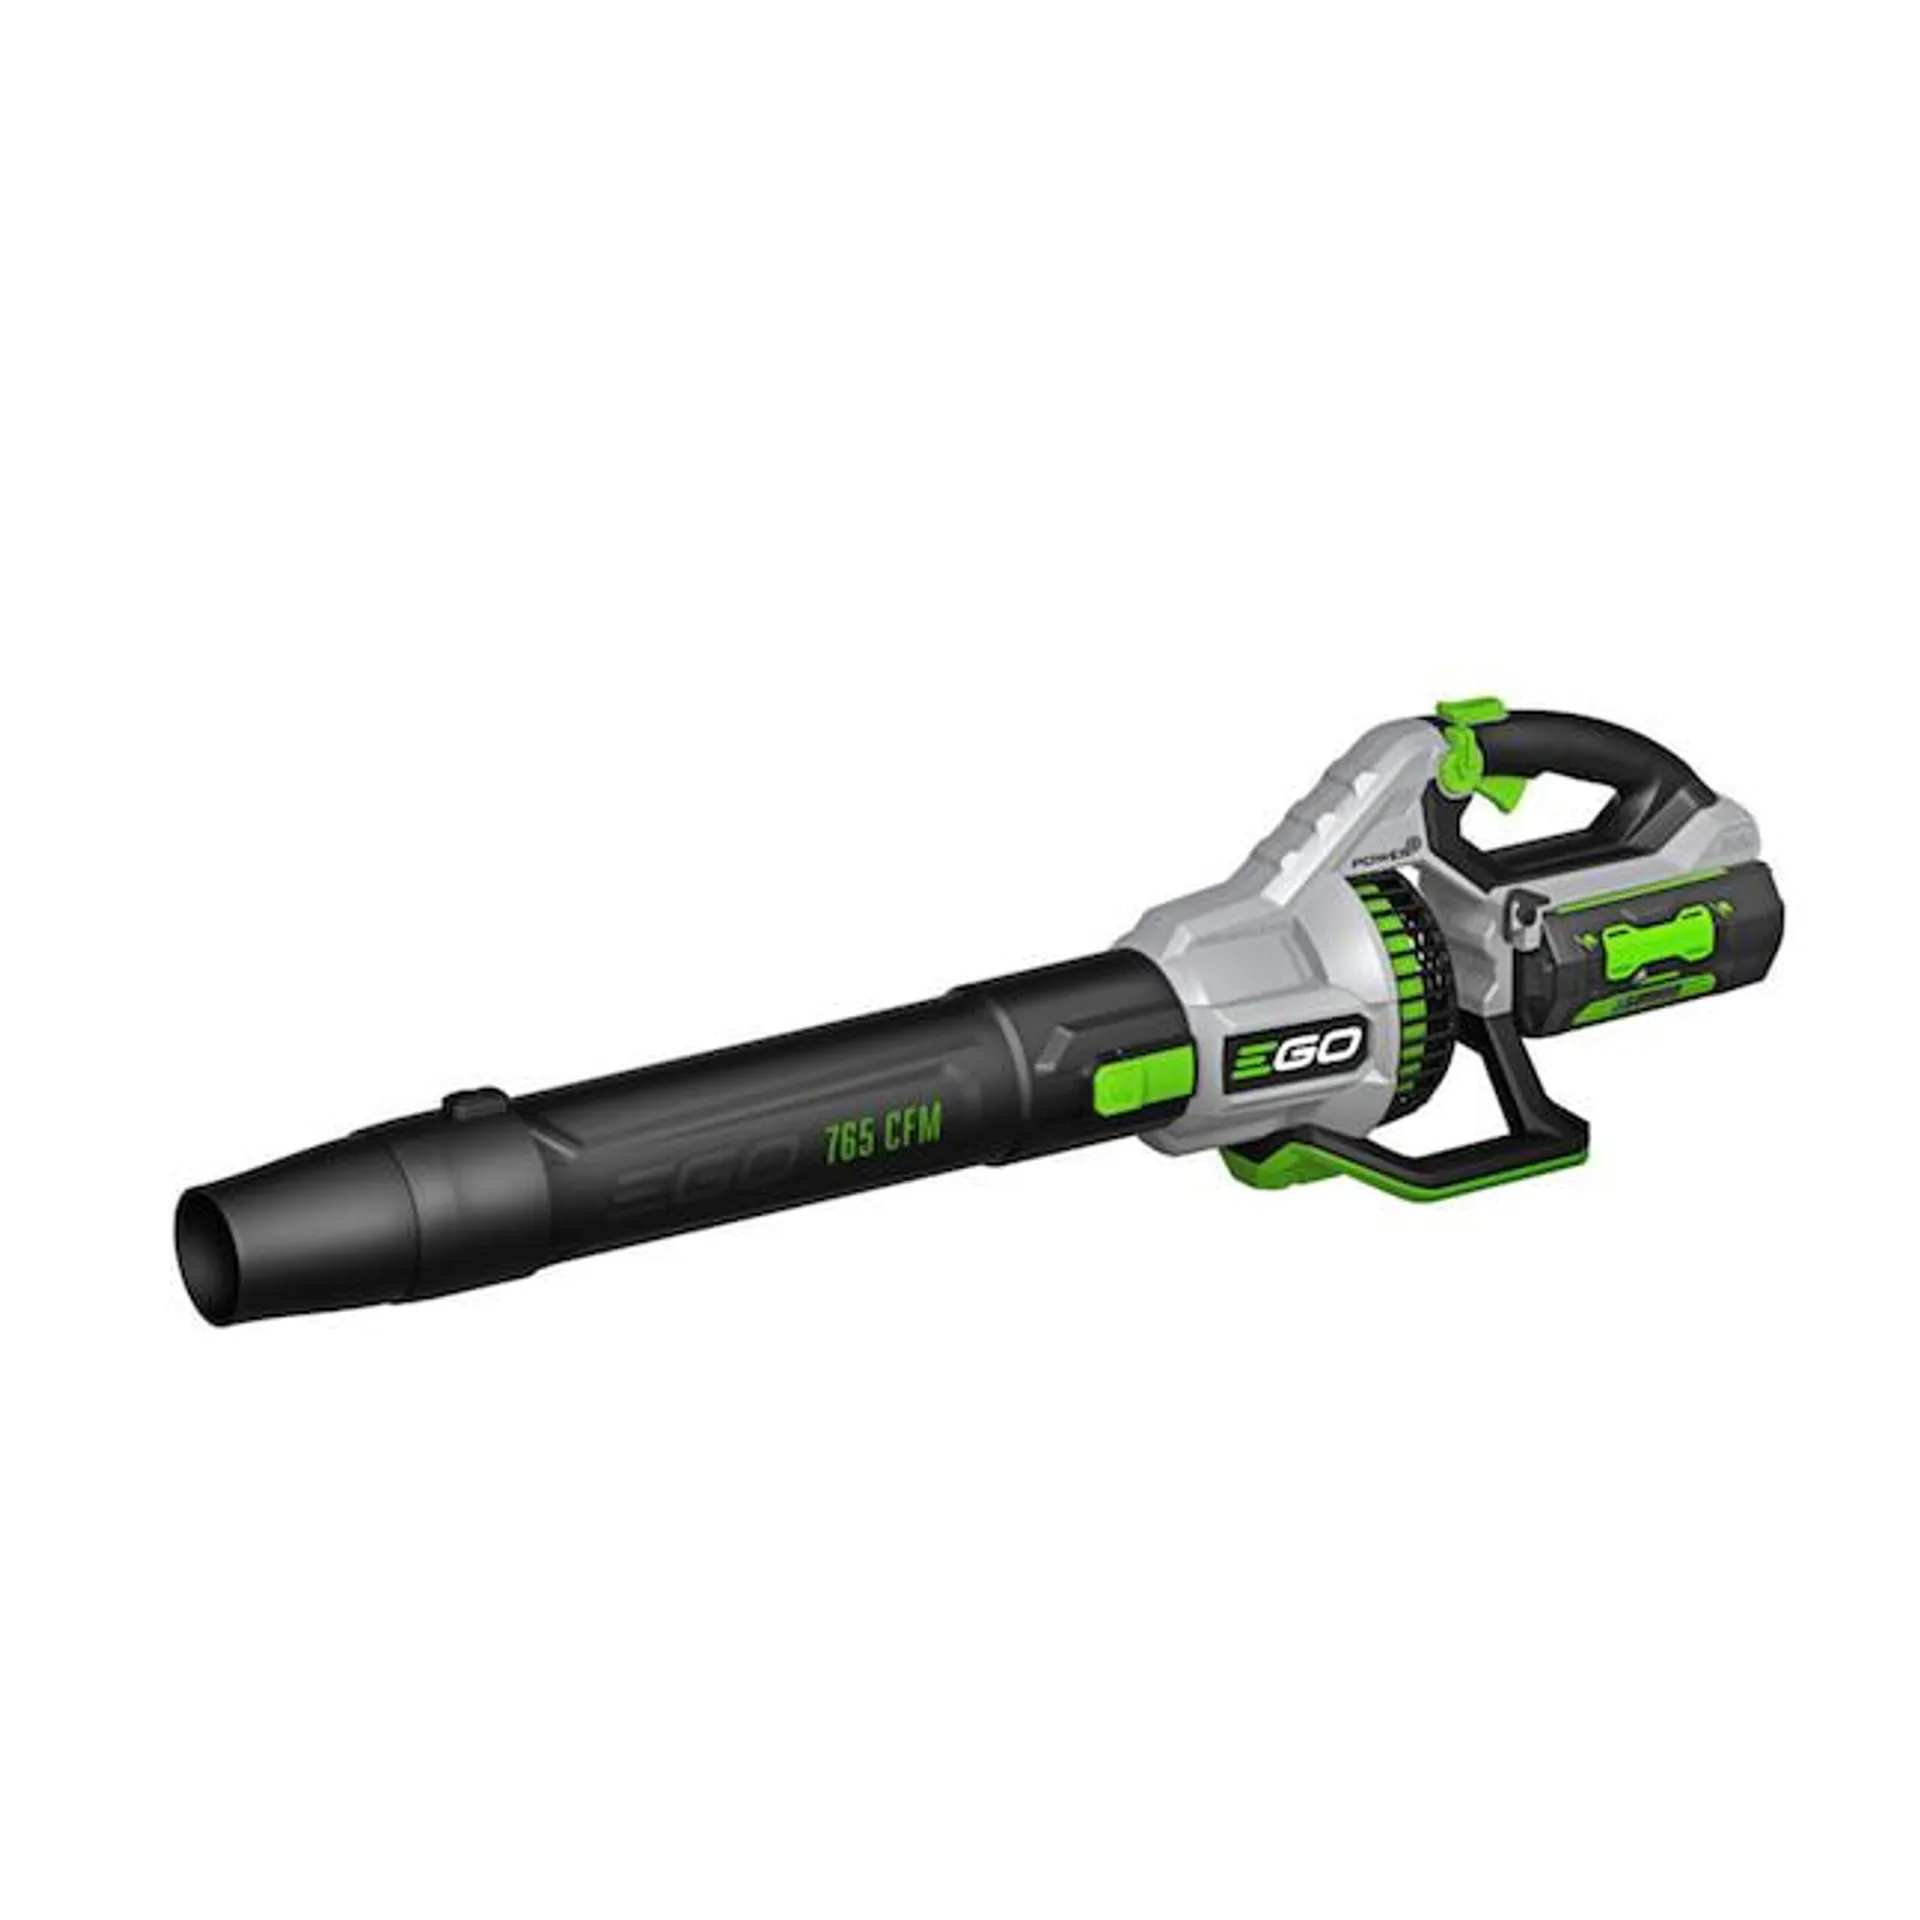 EGO POWER+ 56-volt 765-CFM 200-MPH Battery Handheld Leaf Blower 5 Ah (Battery and Charger Included)